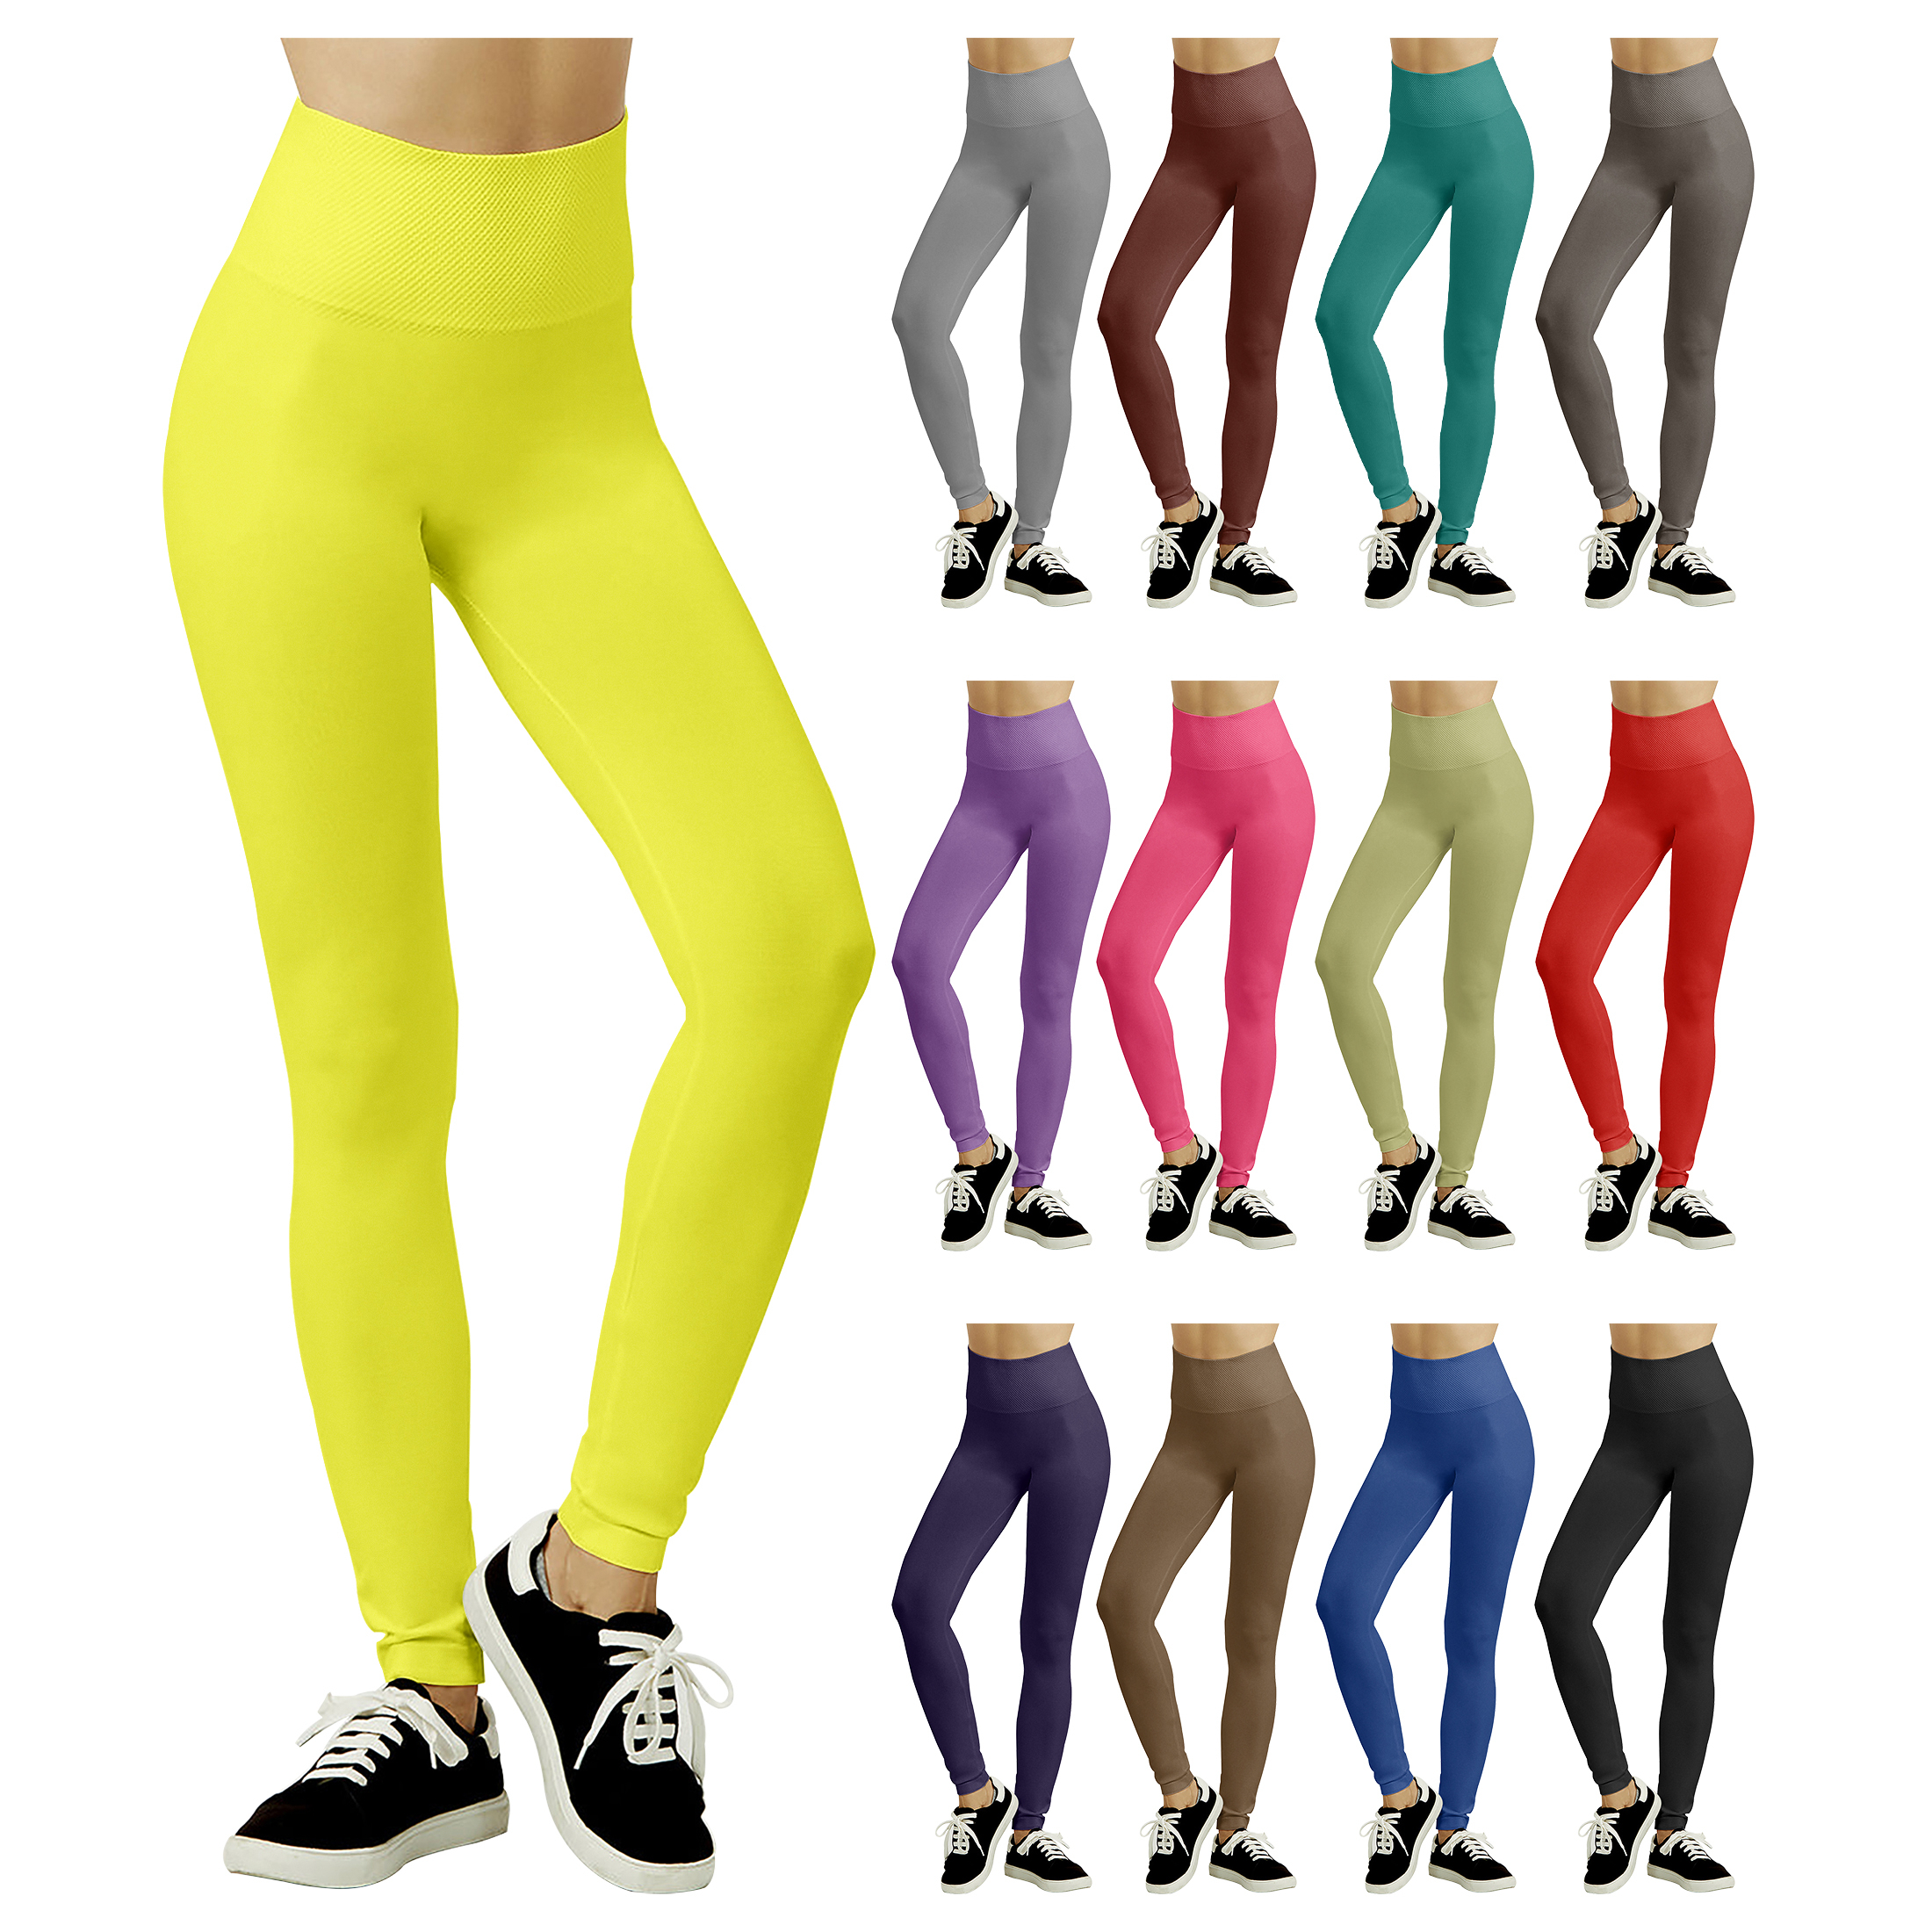 5-Pack Women's Fleece-Lined High Waisted Workout Yoga Leggings - Solid, L/XL